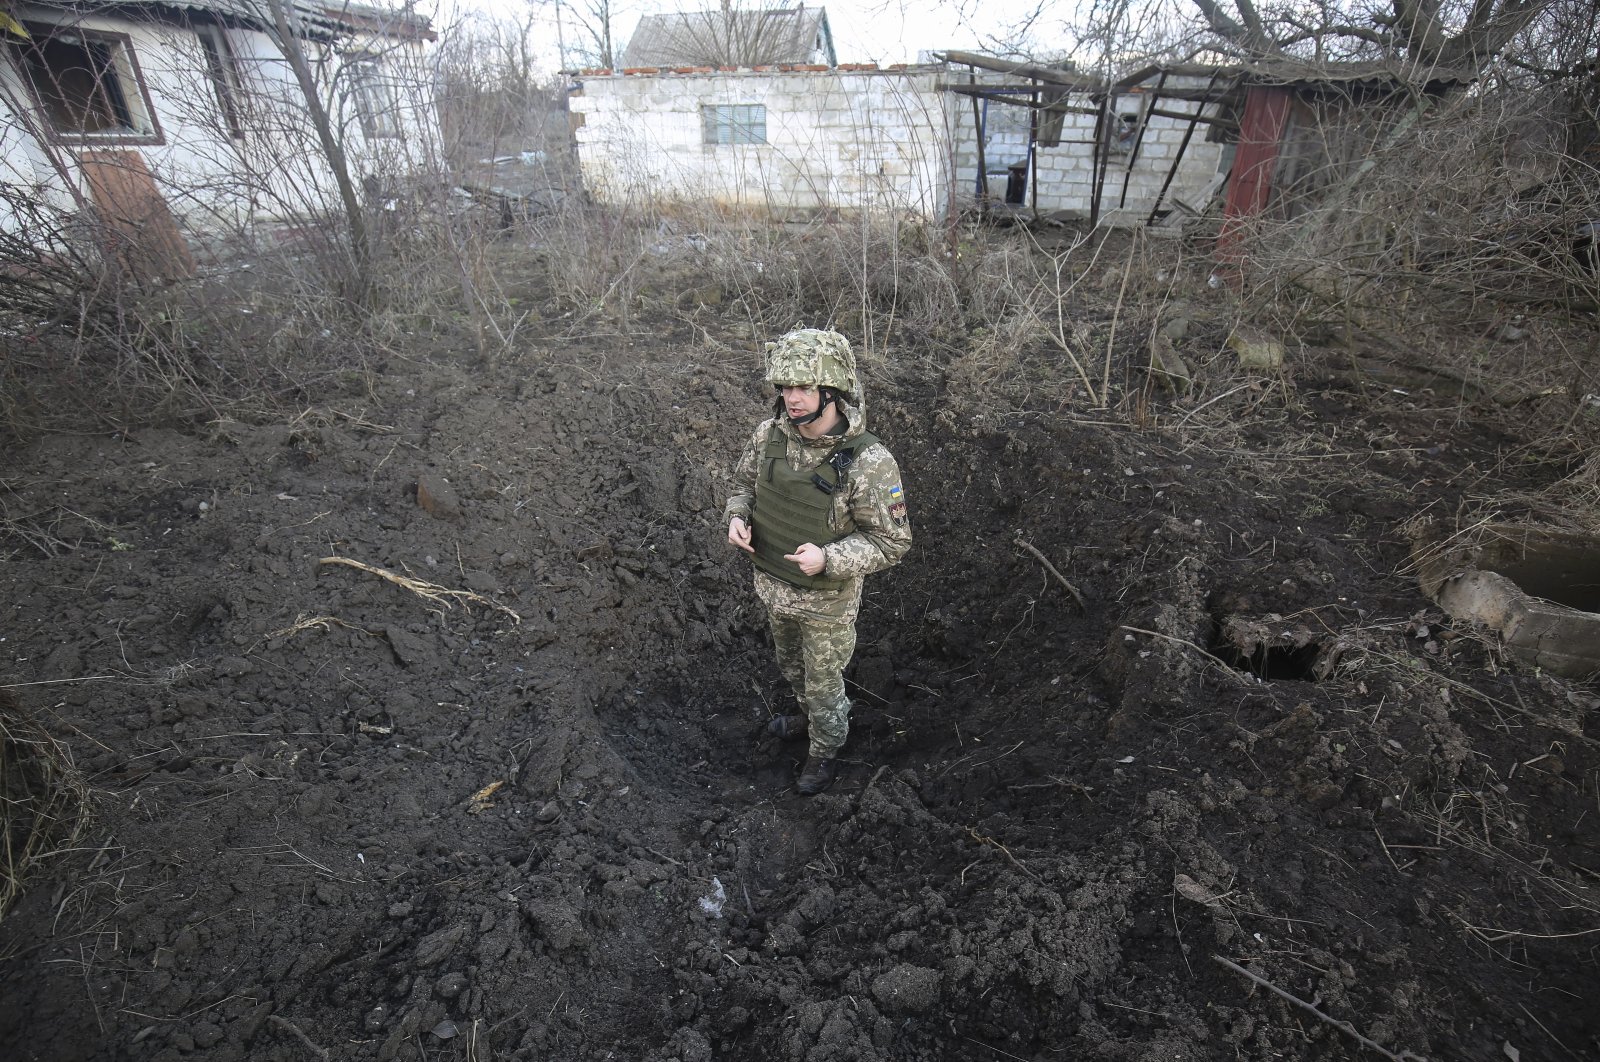 A Ukrainian officer shows a shell hole after shelling in the Zaytseve village not far from the pro-Russian militant-controlled city of Gorlivka Donetsk area, Ukraine, Feb. 21, 2022. (EPA File Photo)